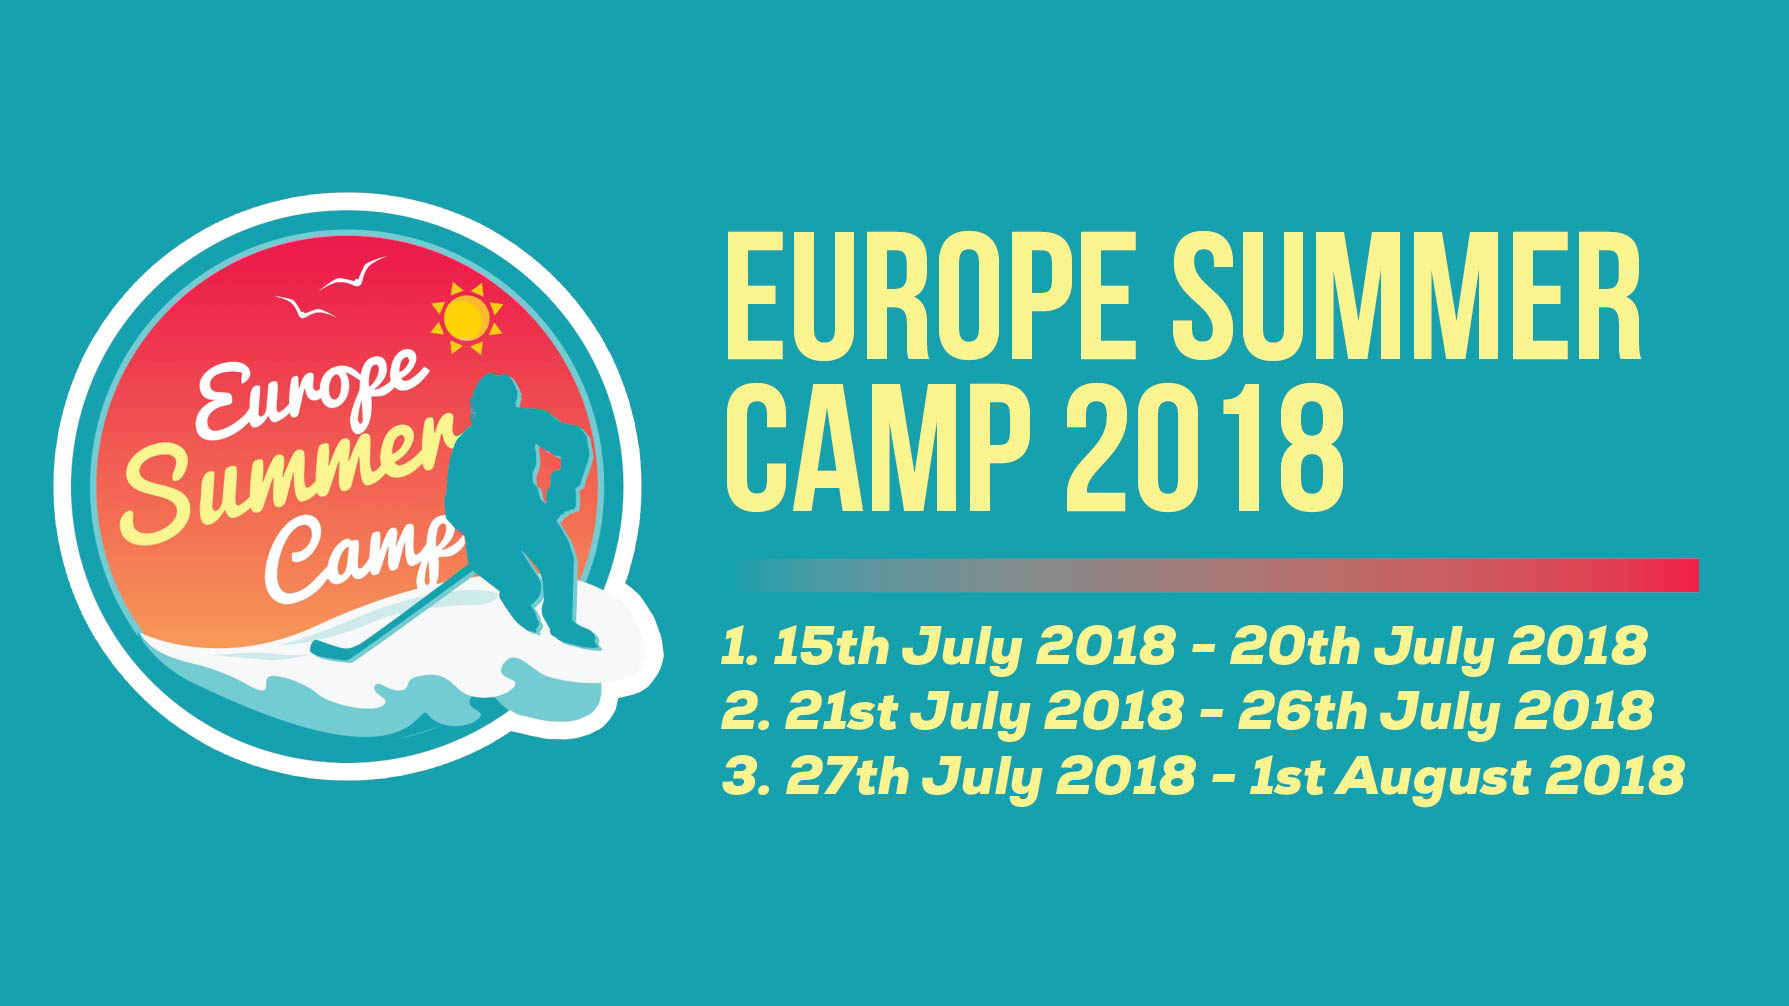 Europe Summer Camp 2018 registration is now live!